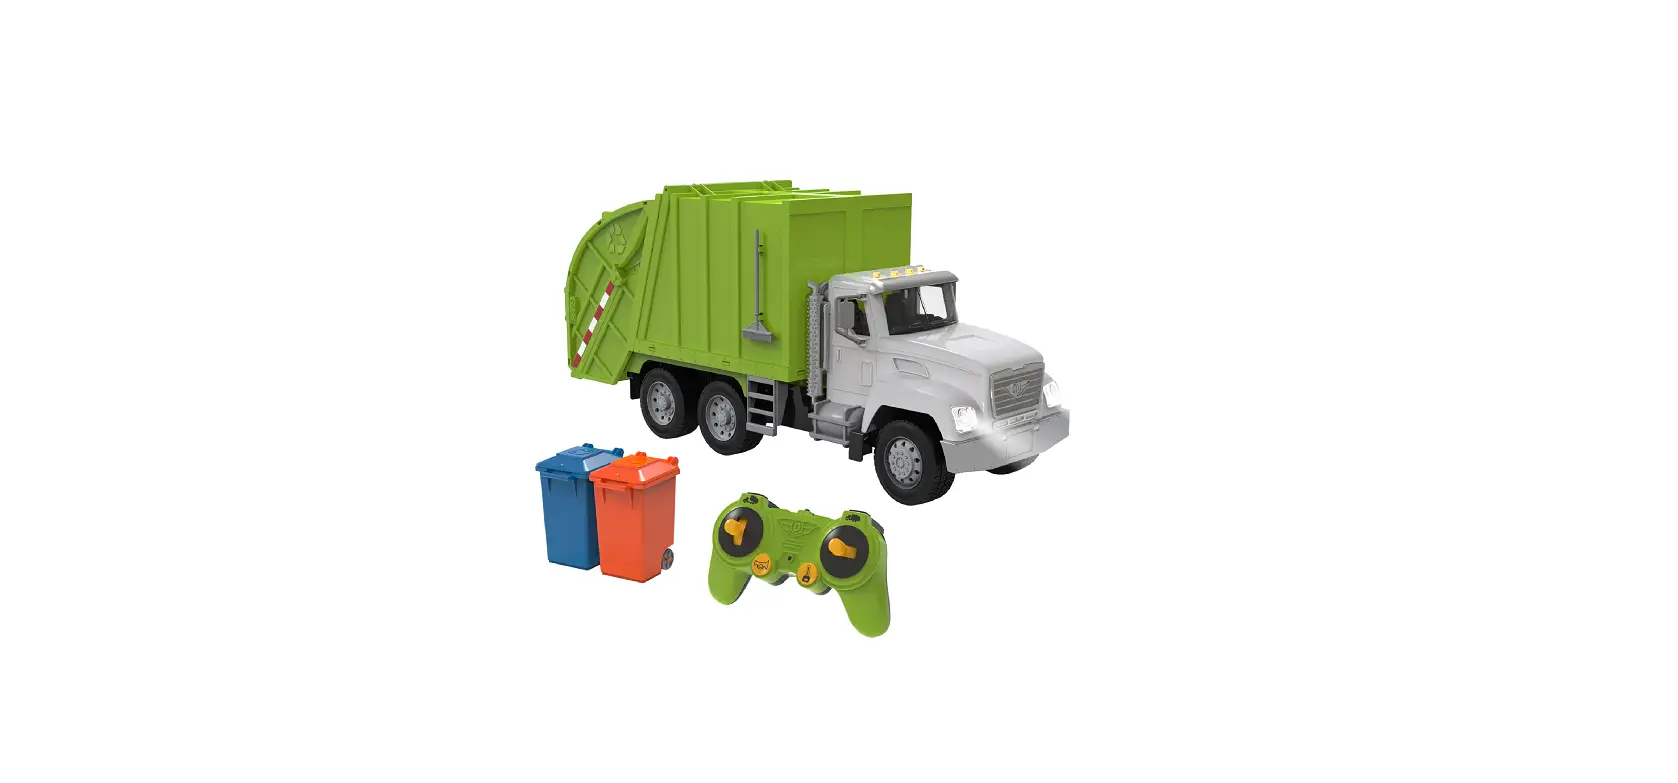 WH1140 Remote Control Recycling Truck